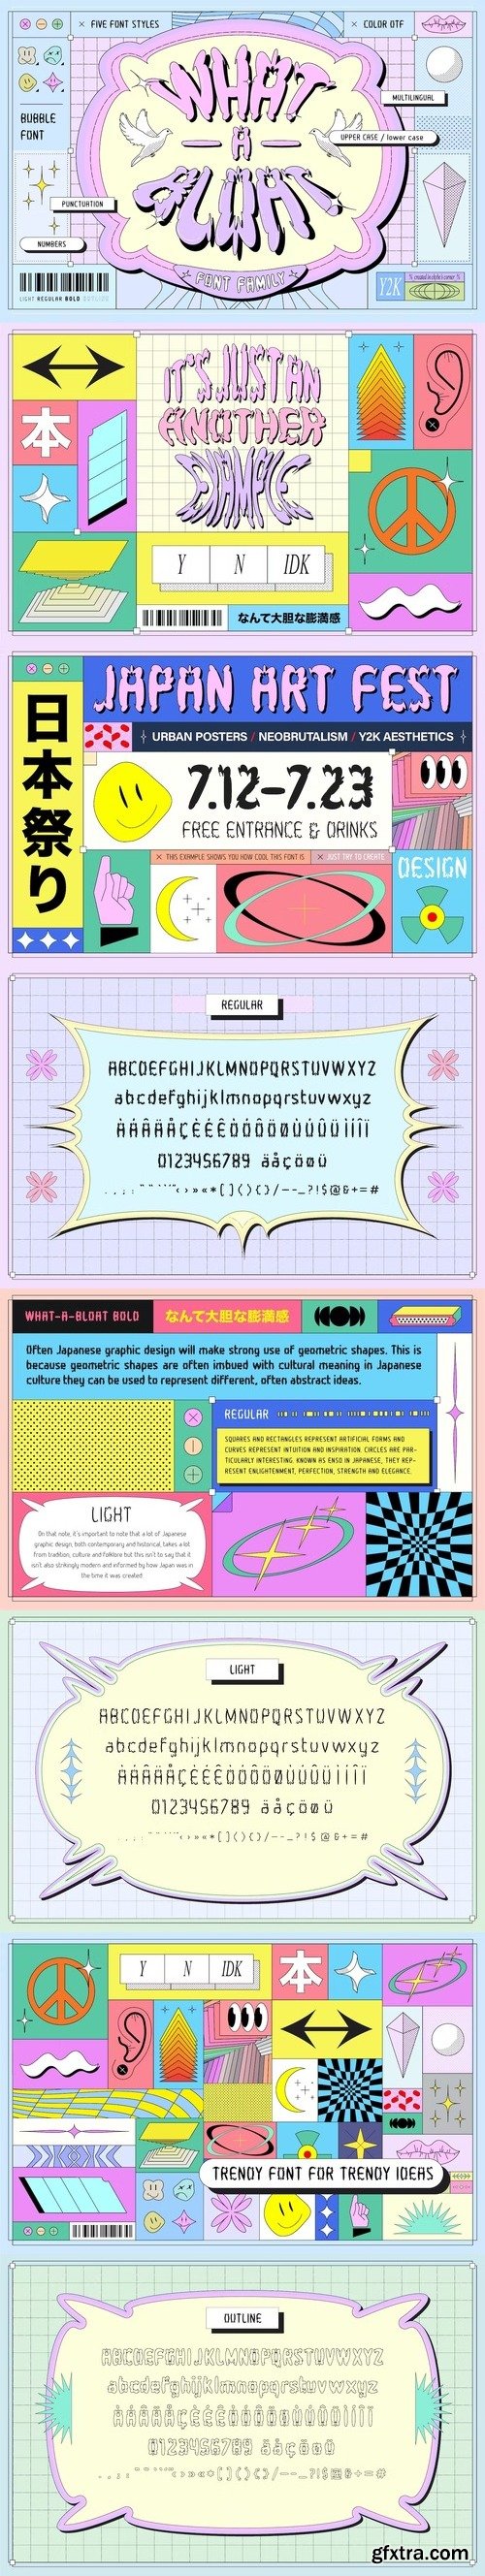 What a bloat font family